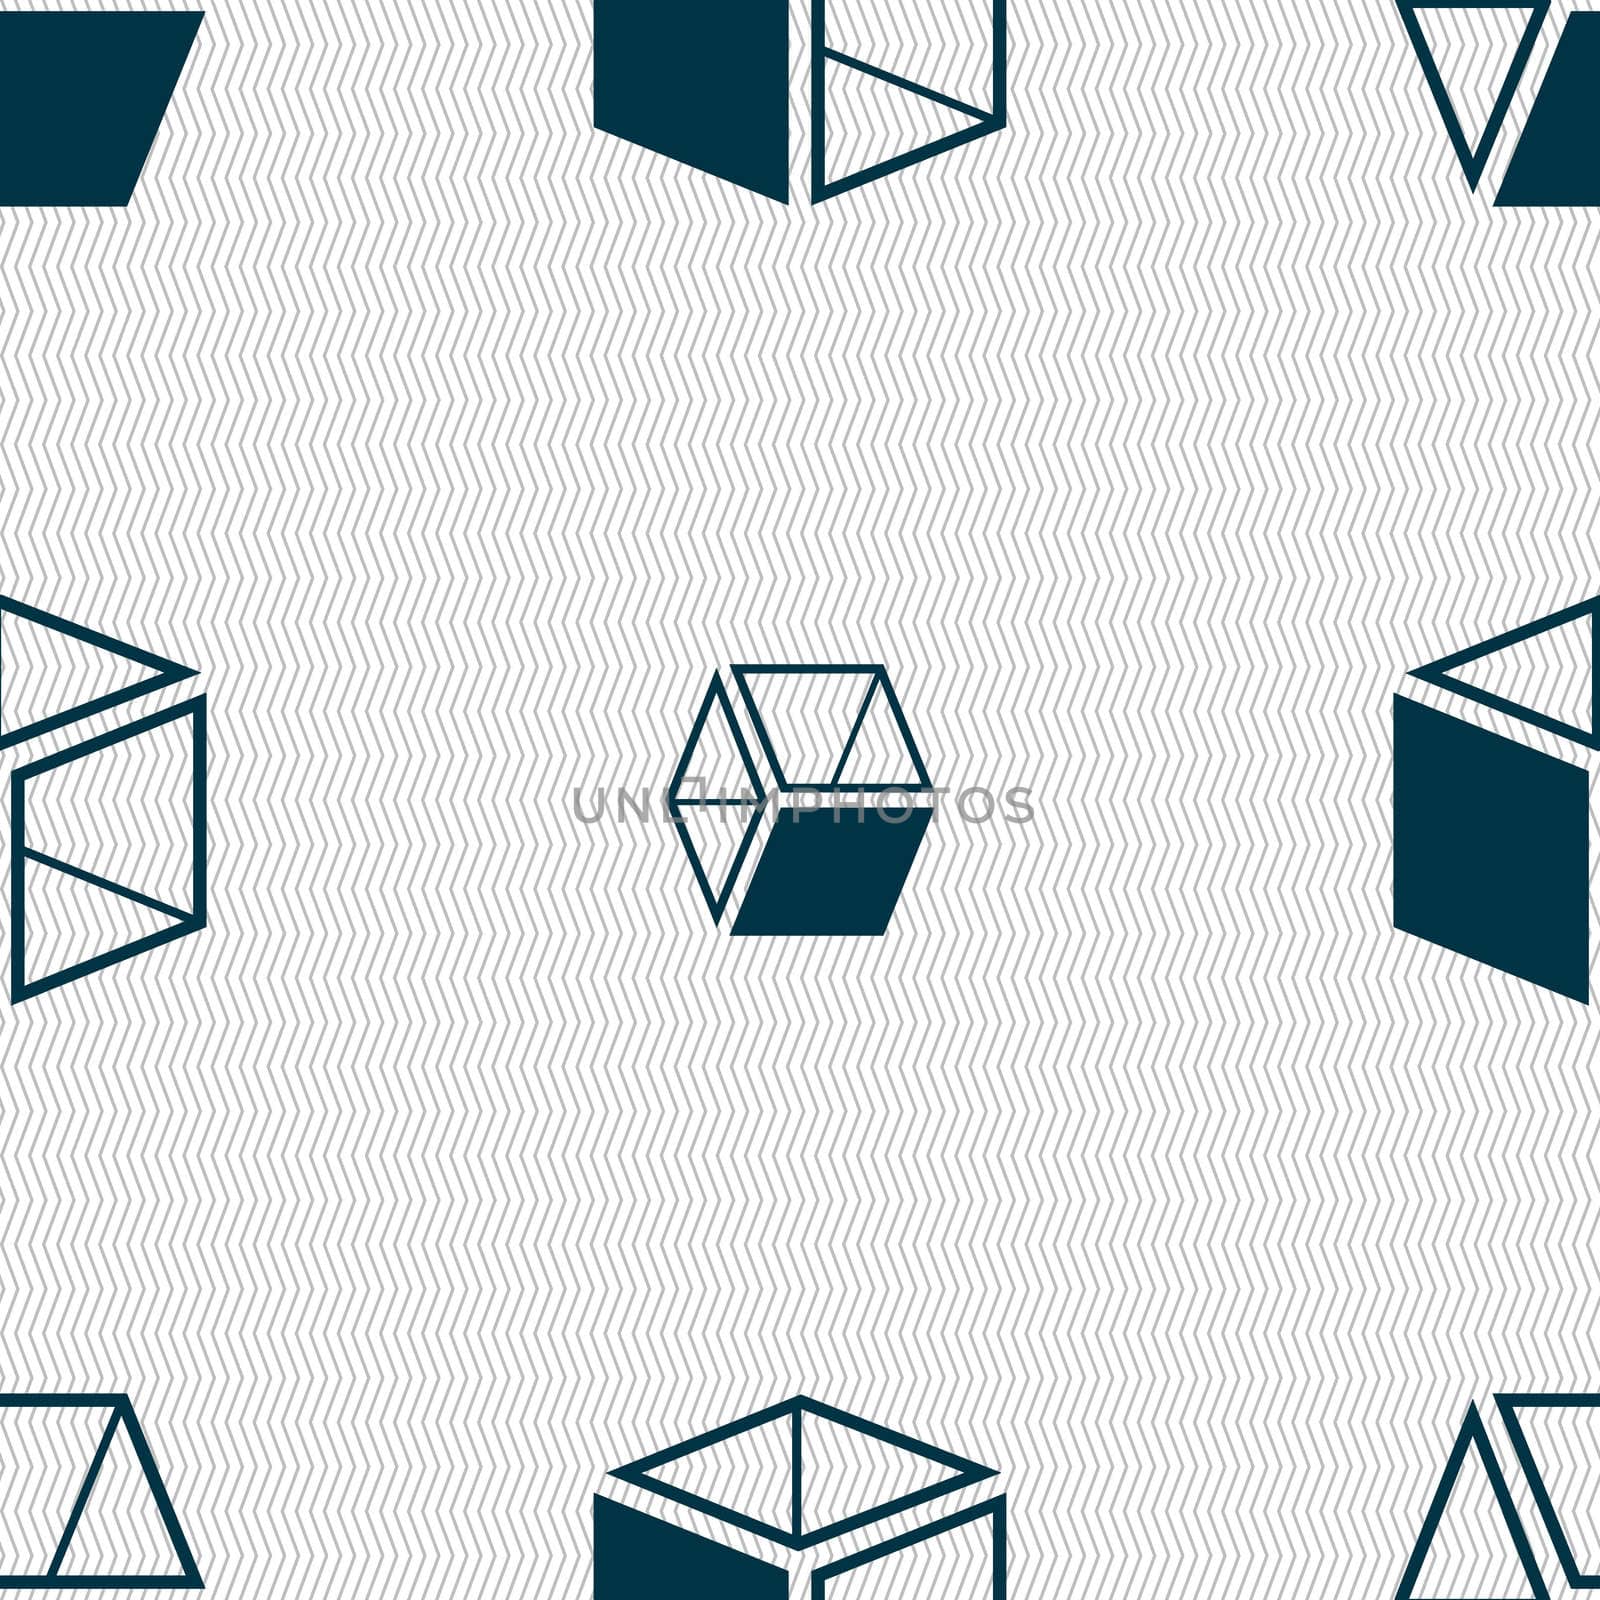 3d cube icon sign. Seamless abstract background with geometric shapes. illustration